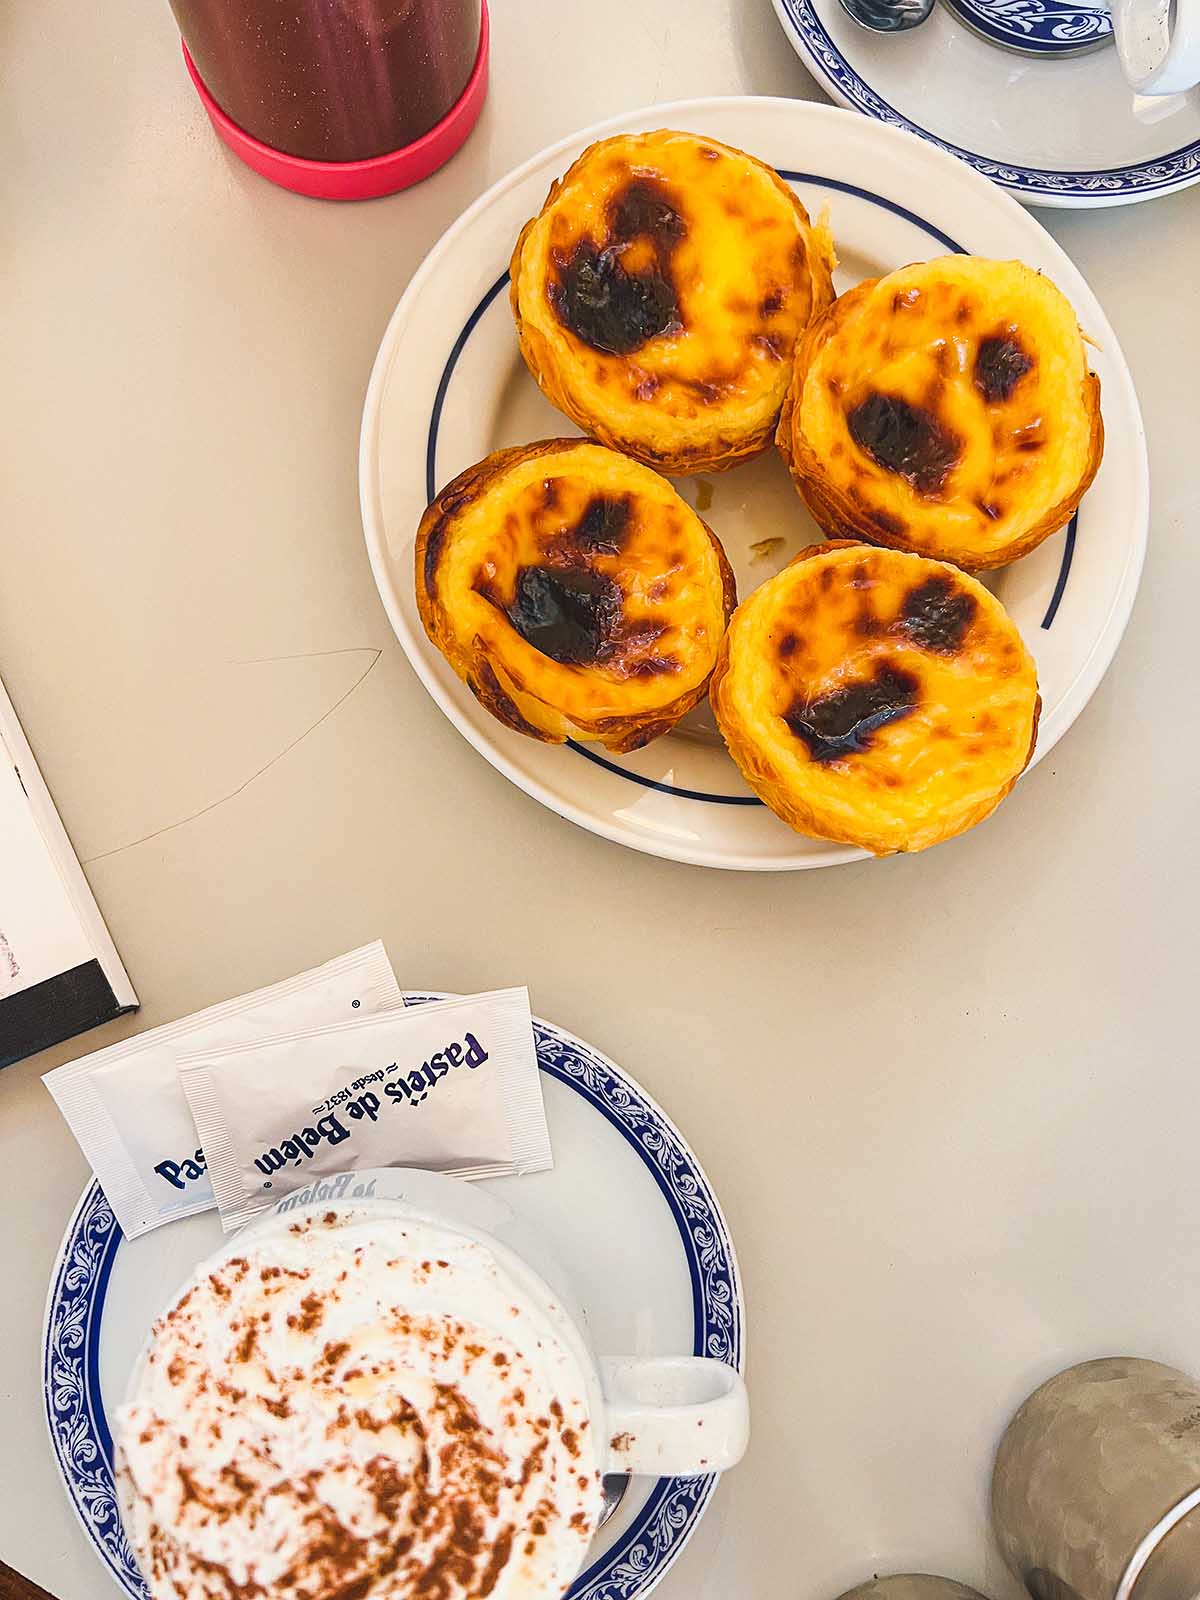 Pasteis de nata on a plate and cappuccinos with whipped cream.